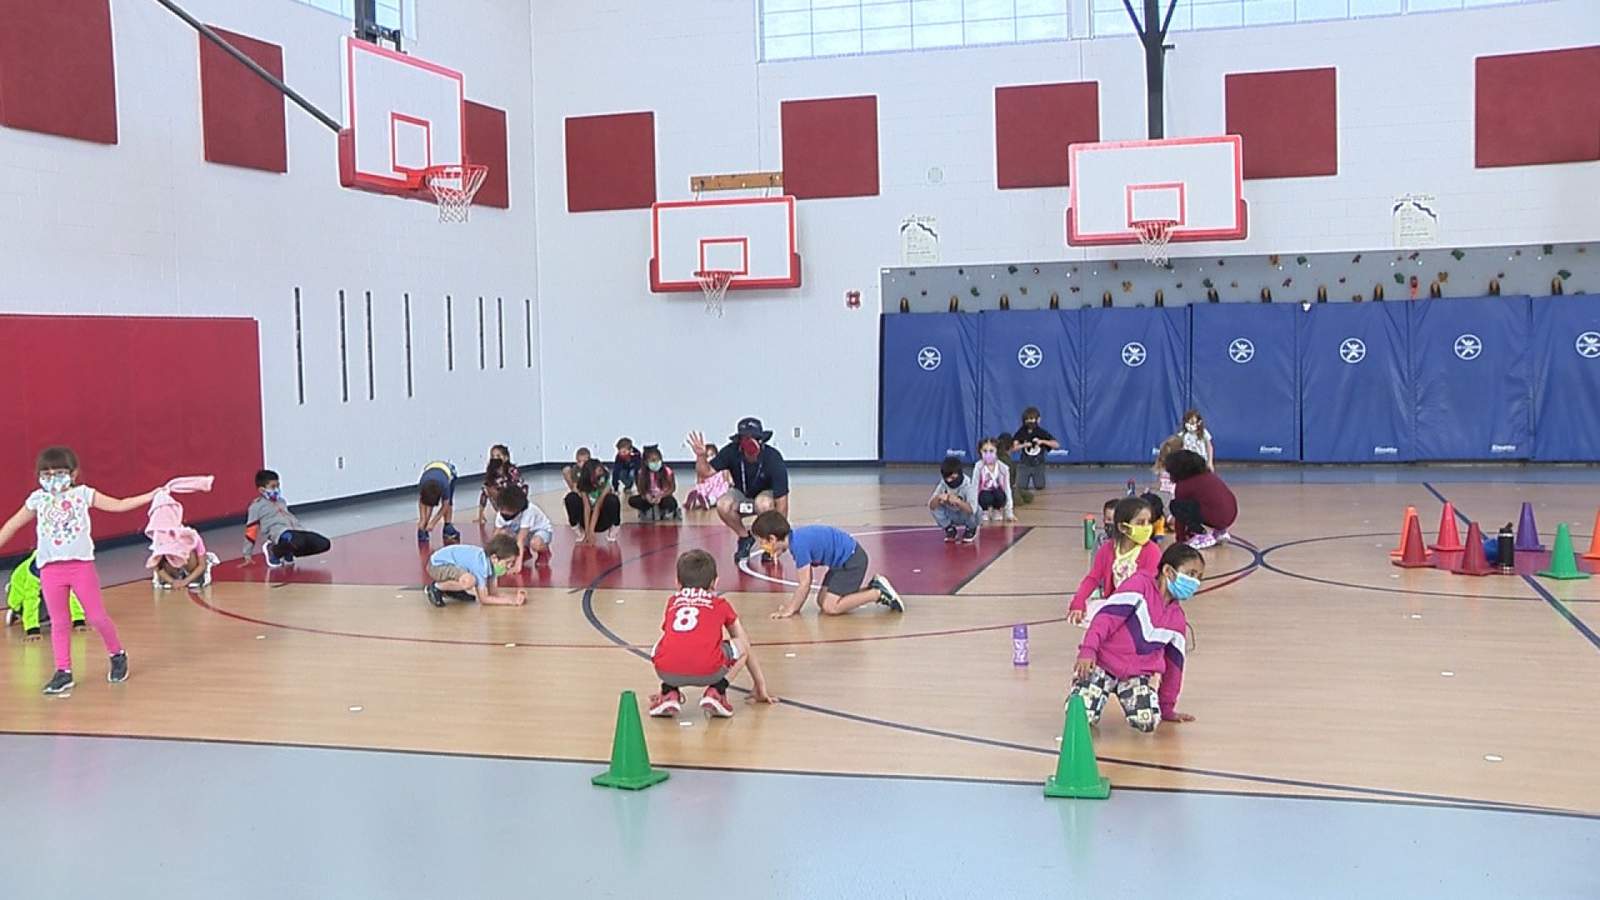 San Antonio Sports partners with area schools to make sure students get physical education